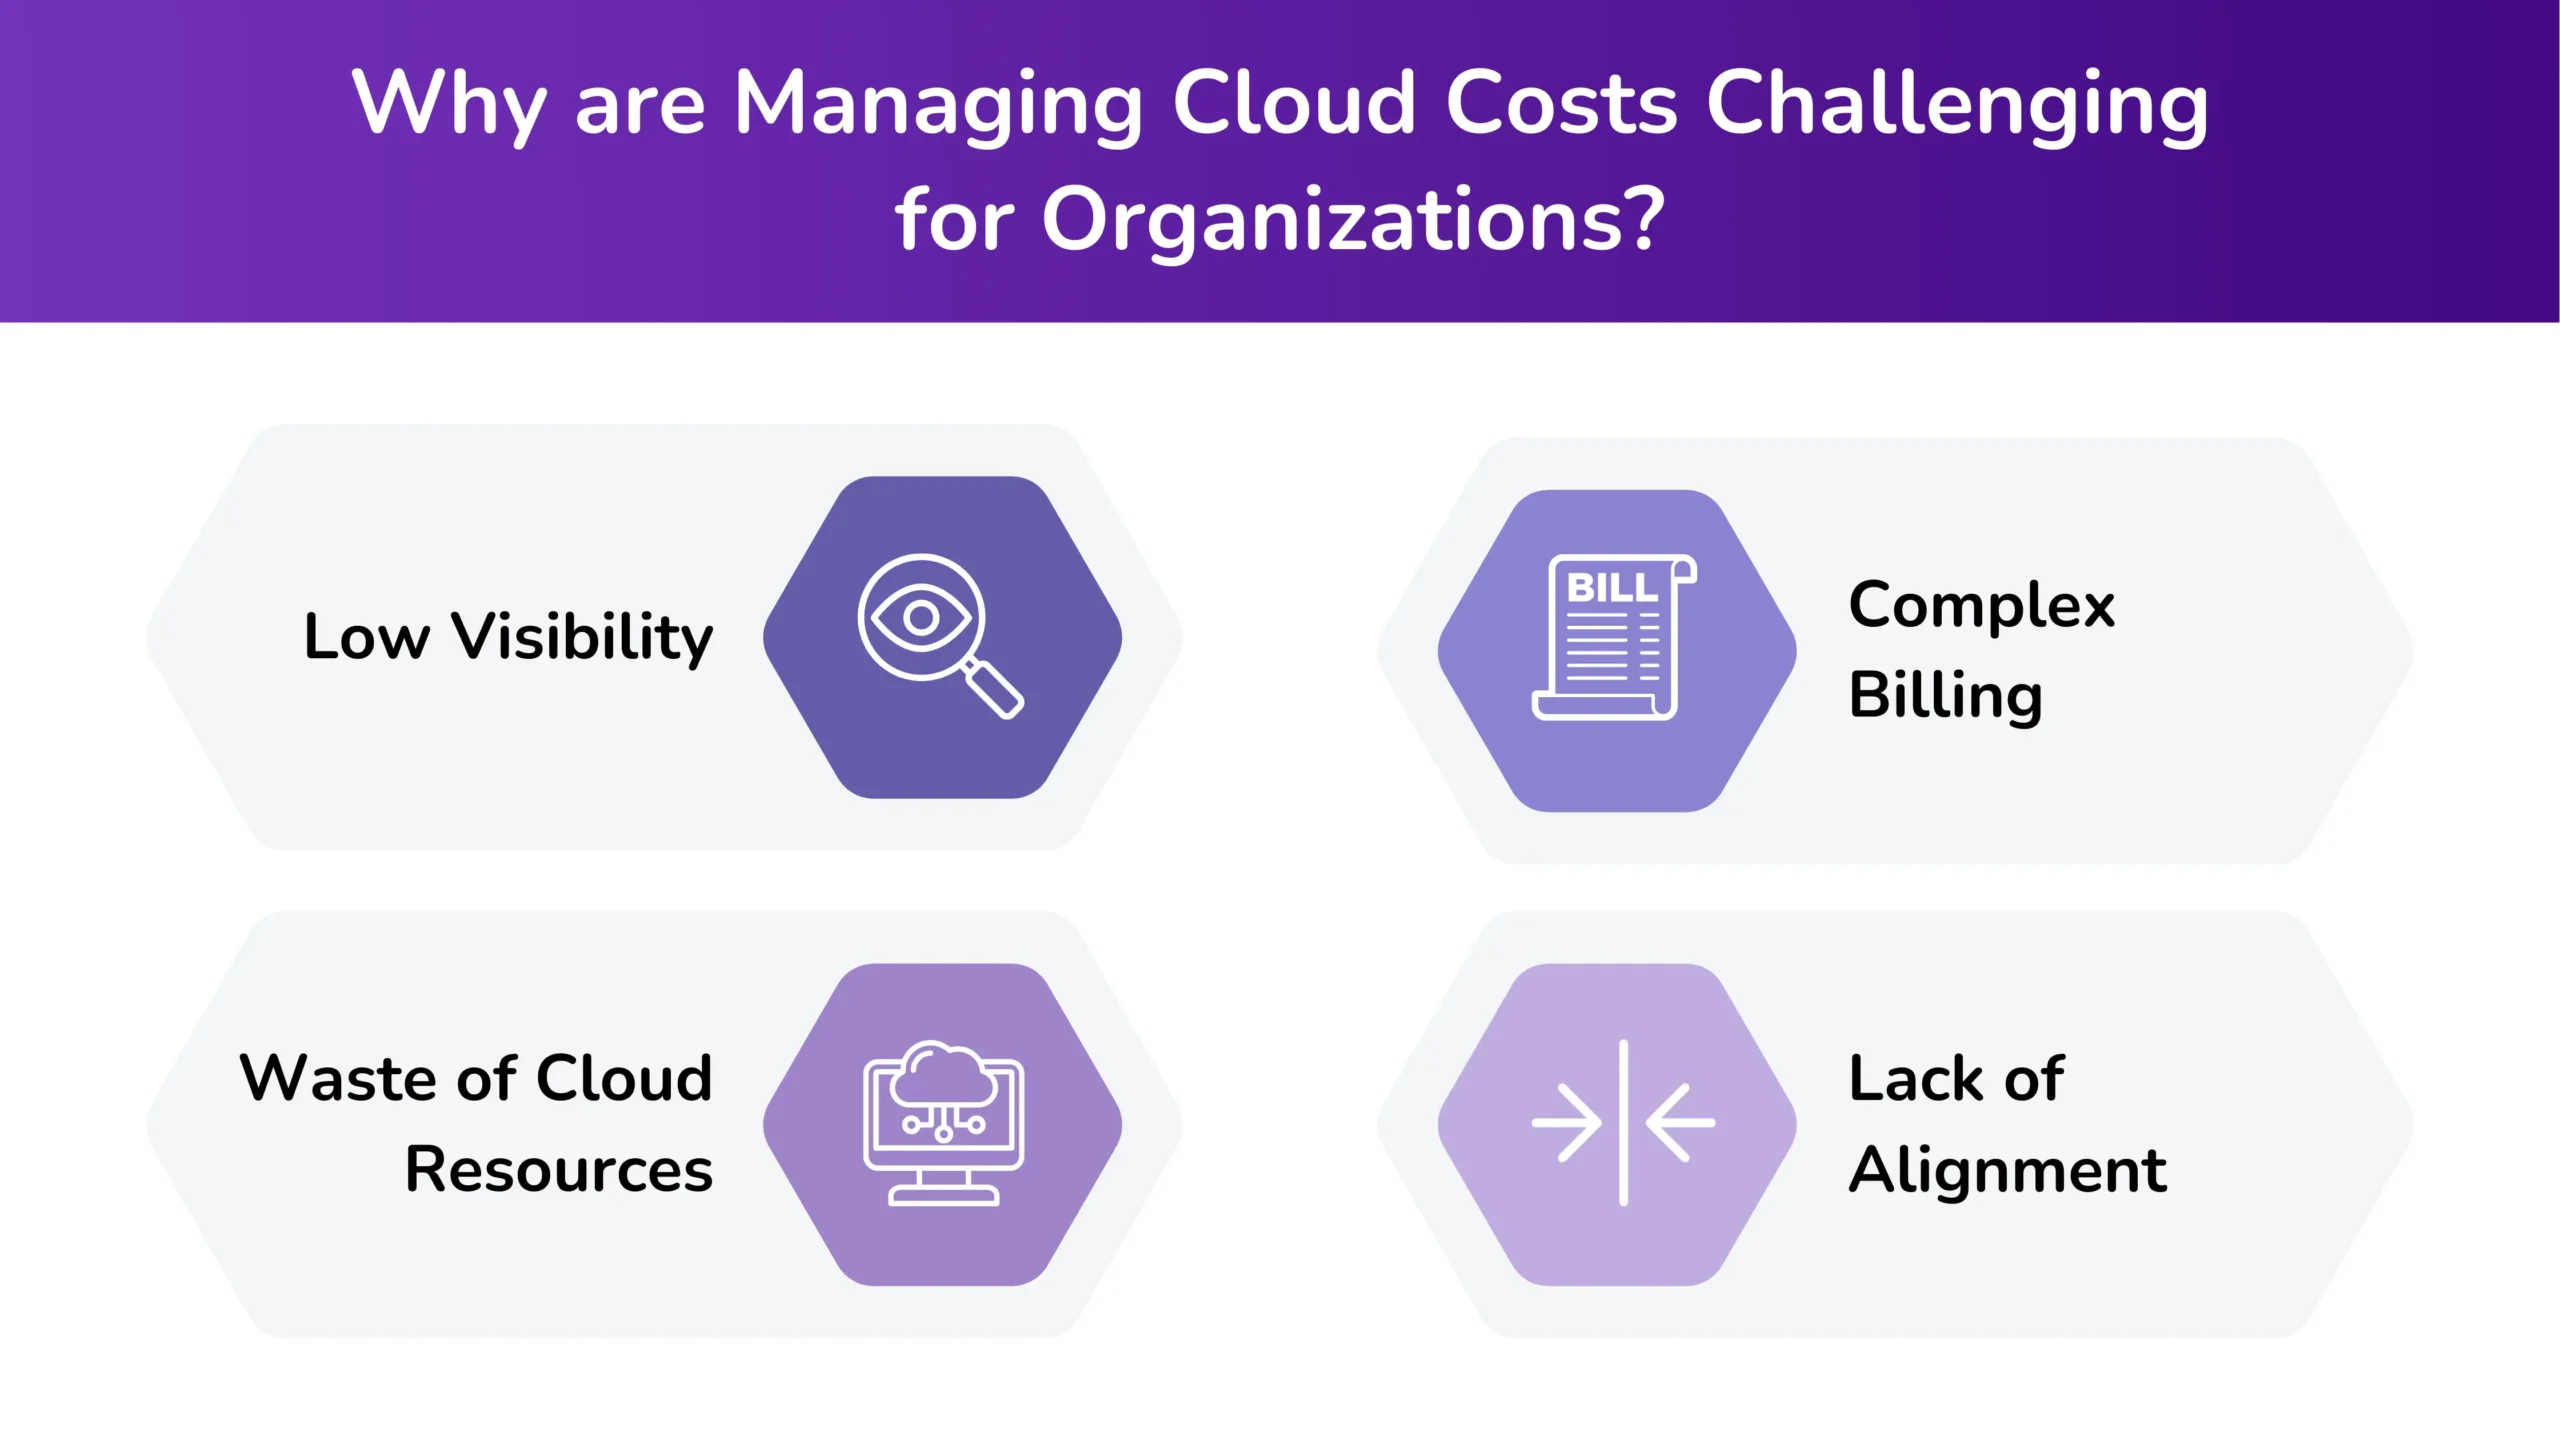 Why are Managing Cloud Costs Challenging for Organizations